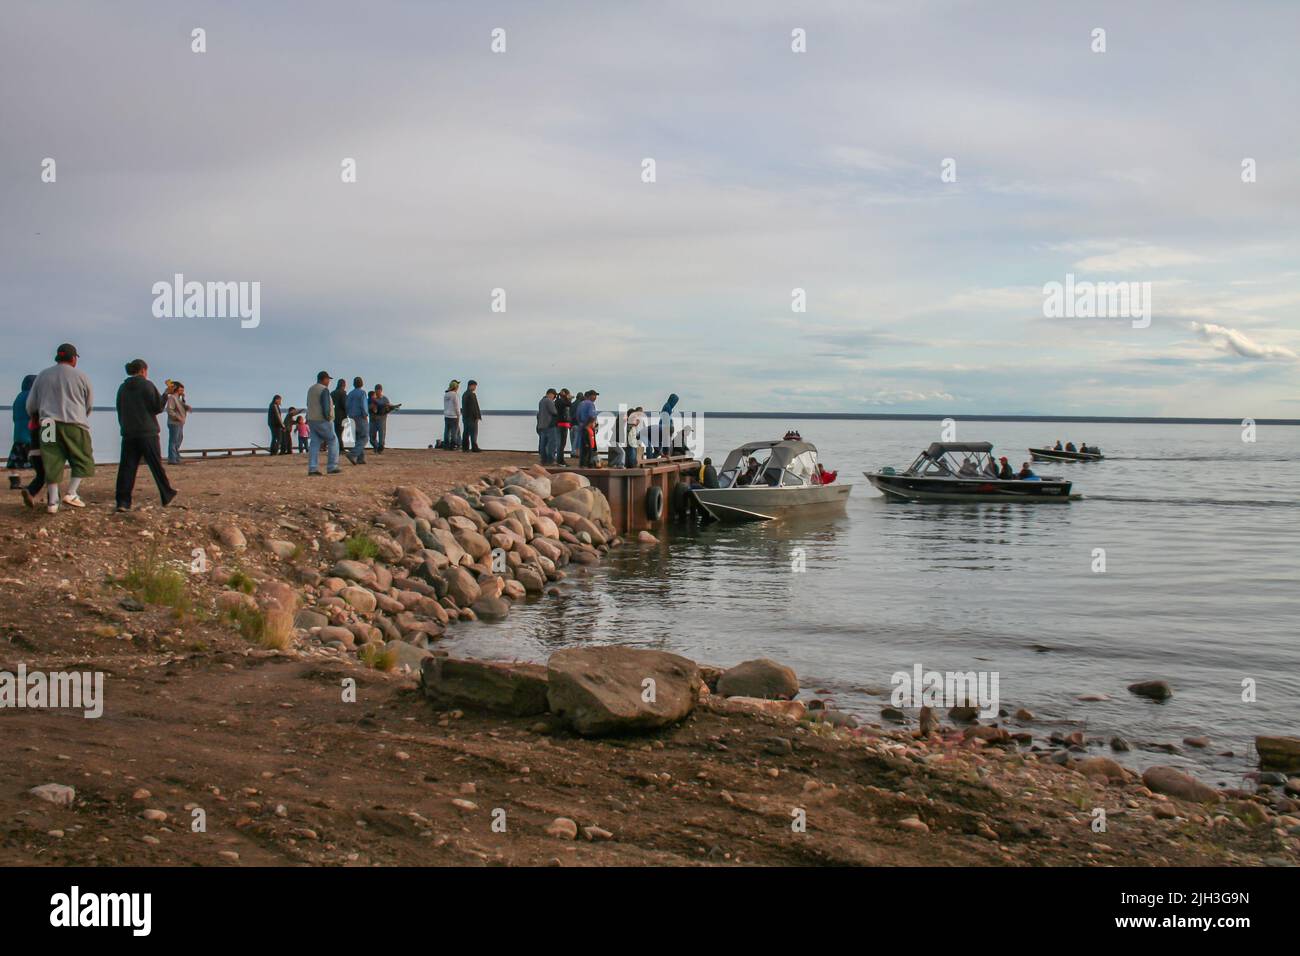 Arrival of Indigenous Dene visitors in boats on Great Bear Lake, in the northern community of Deline, Northwest Territories, Canada Stock Photo